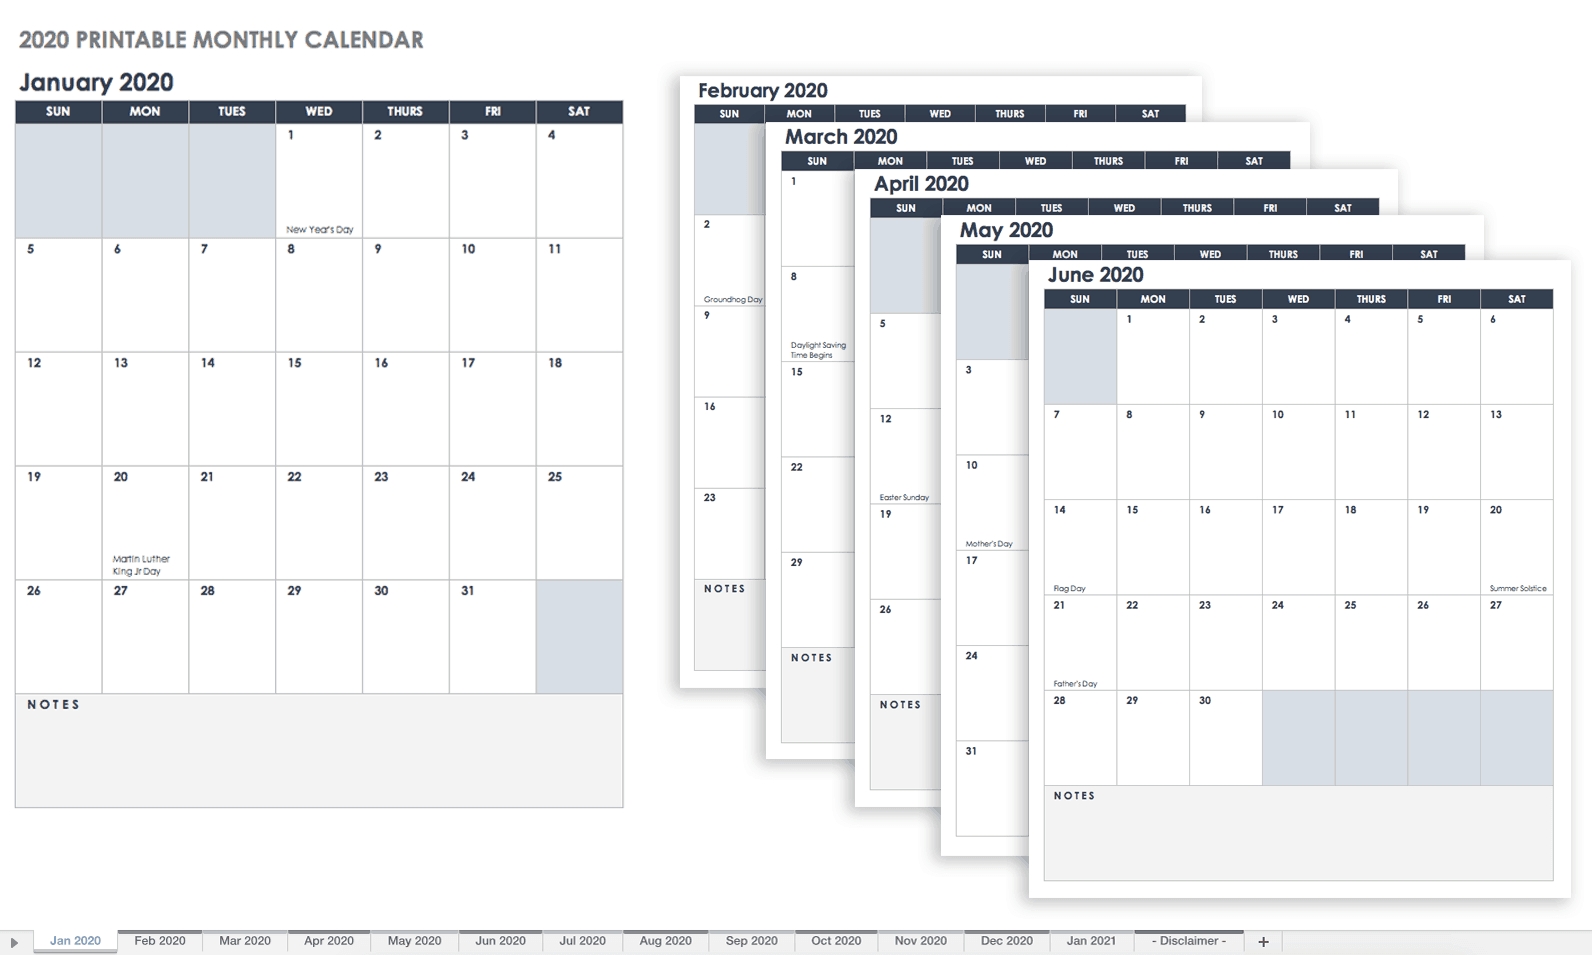 Free Blank Calendar Templates - Smartsheet-Calendar Template 3 Months Per Page Time And Date